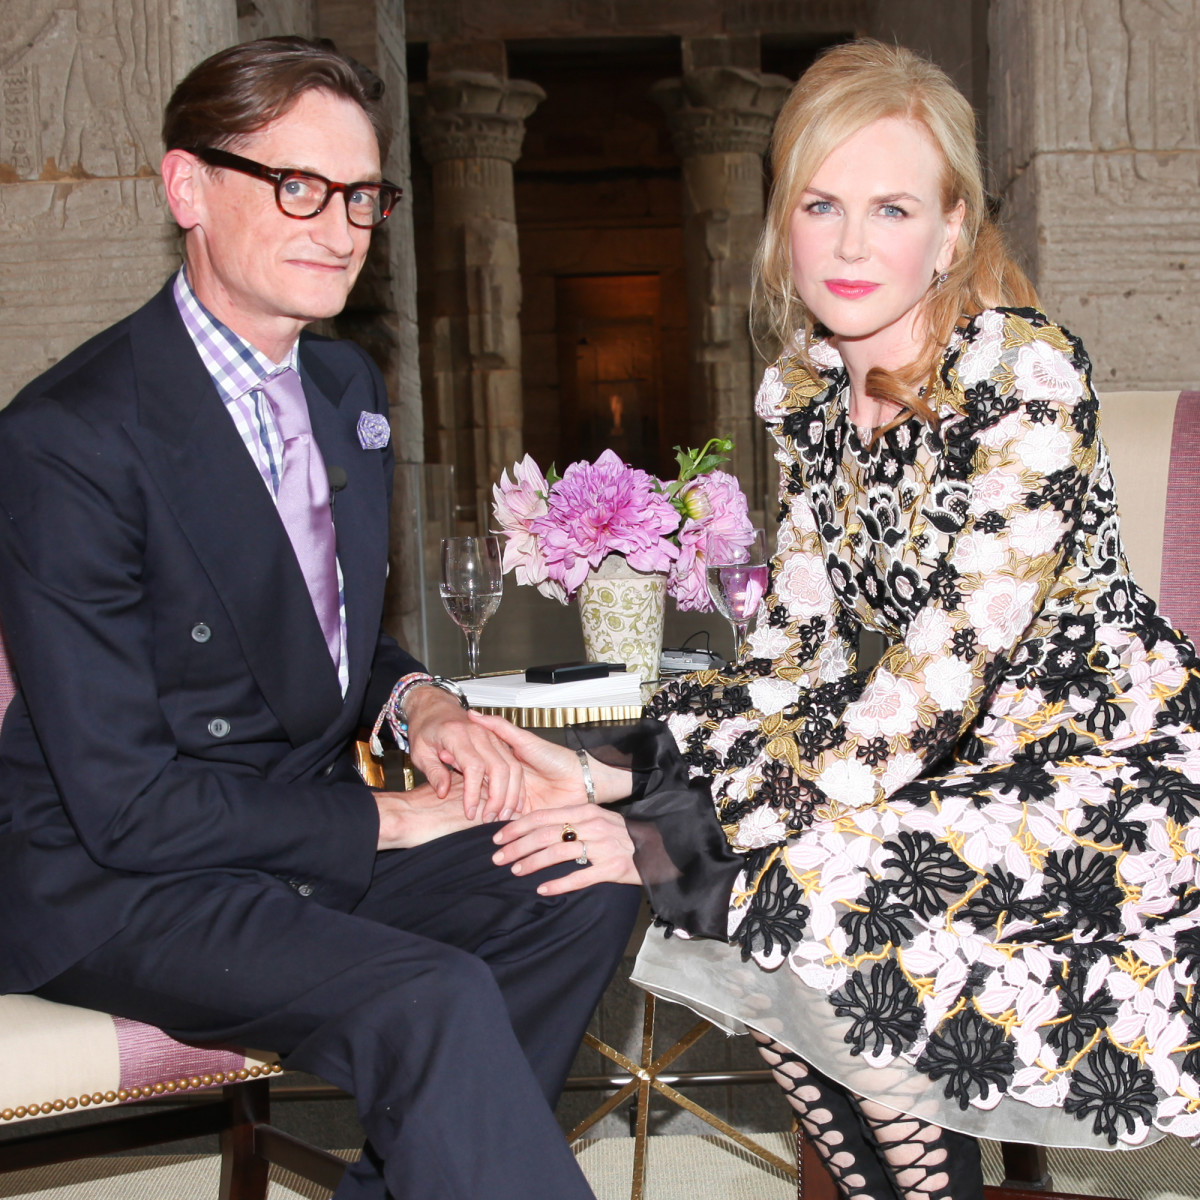 Hamish Bowles and Nicole Kidman get cozy during the Vogue''s Discussion on Costume in Film in the Metropolitan Museum of Art. Photo: Vogue